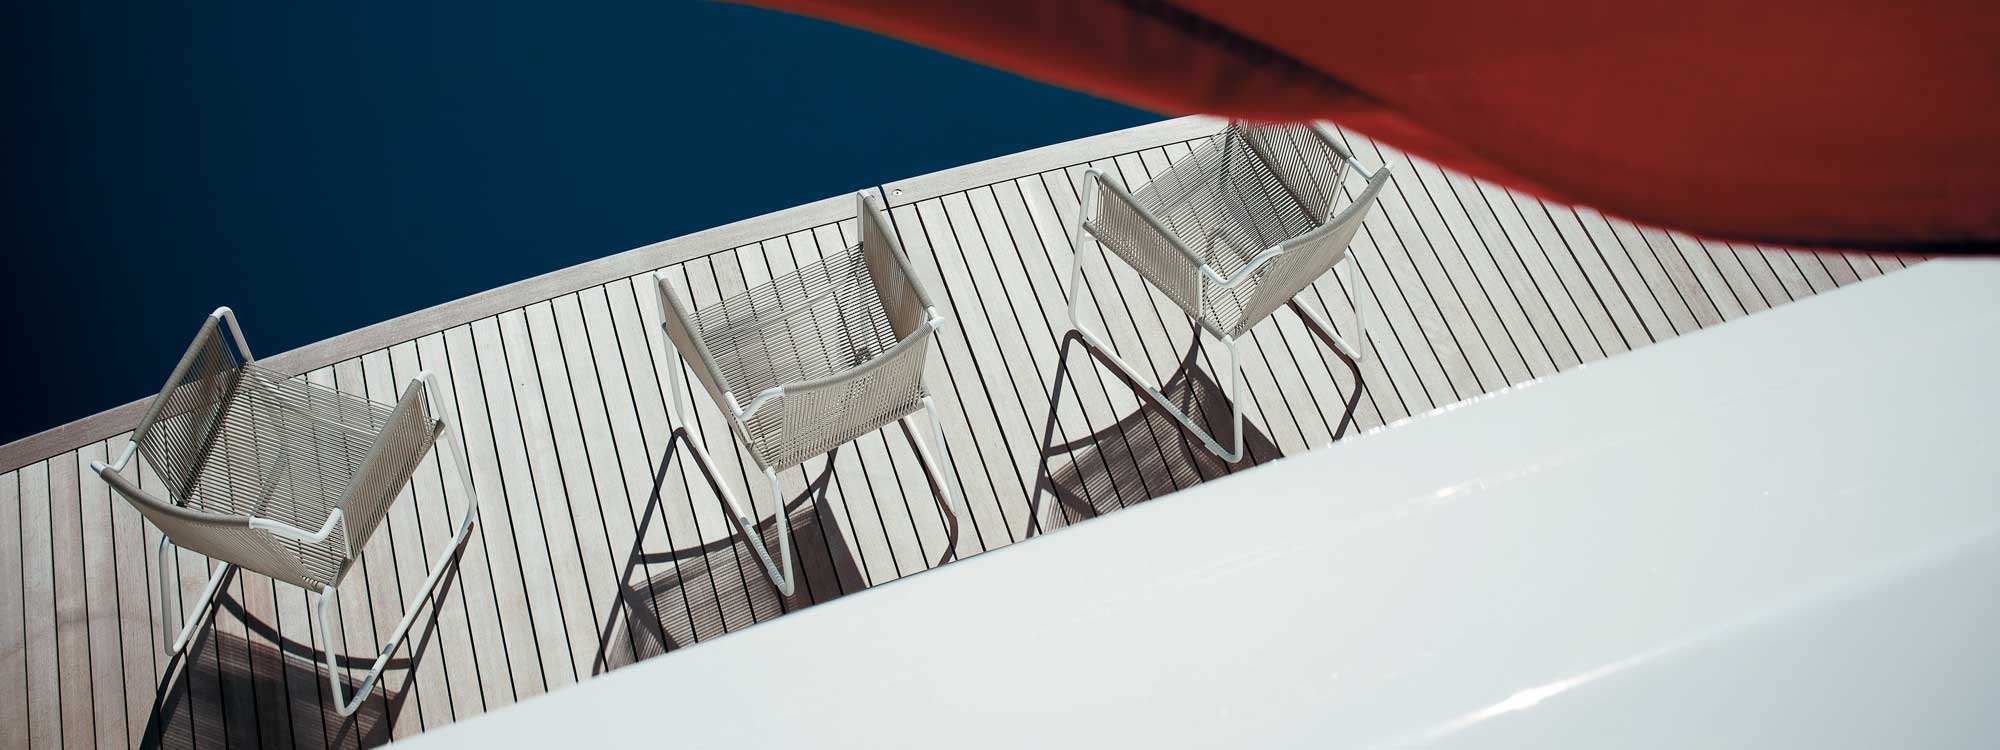 Image of white Harp garden armchairs by RODA on decking